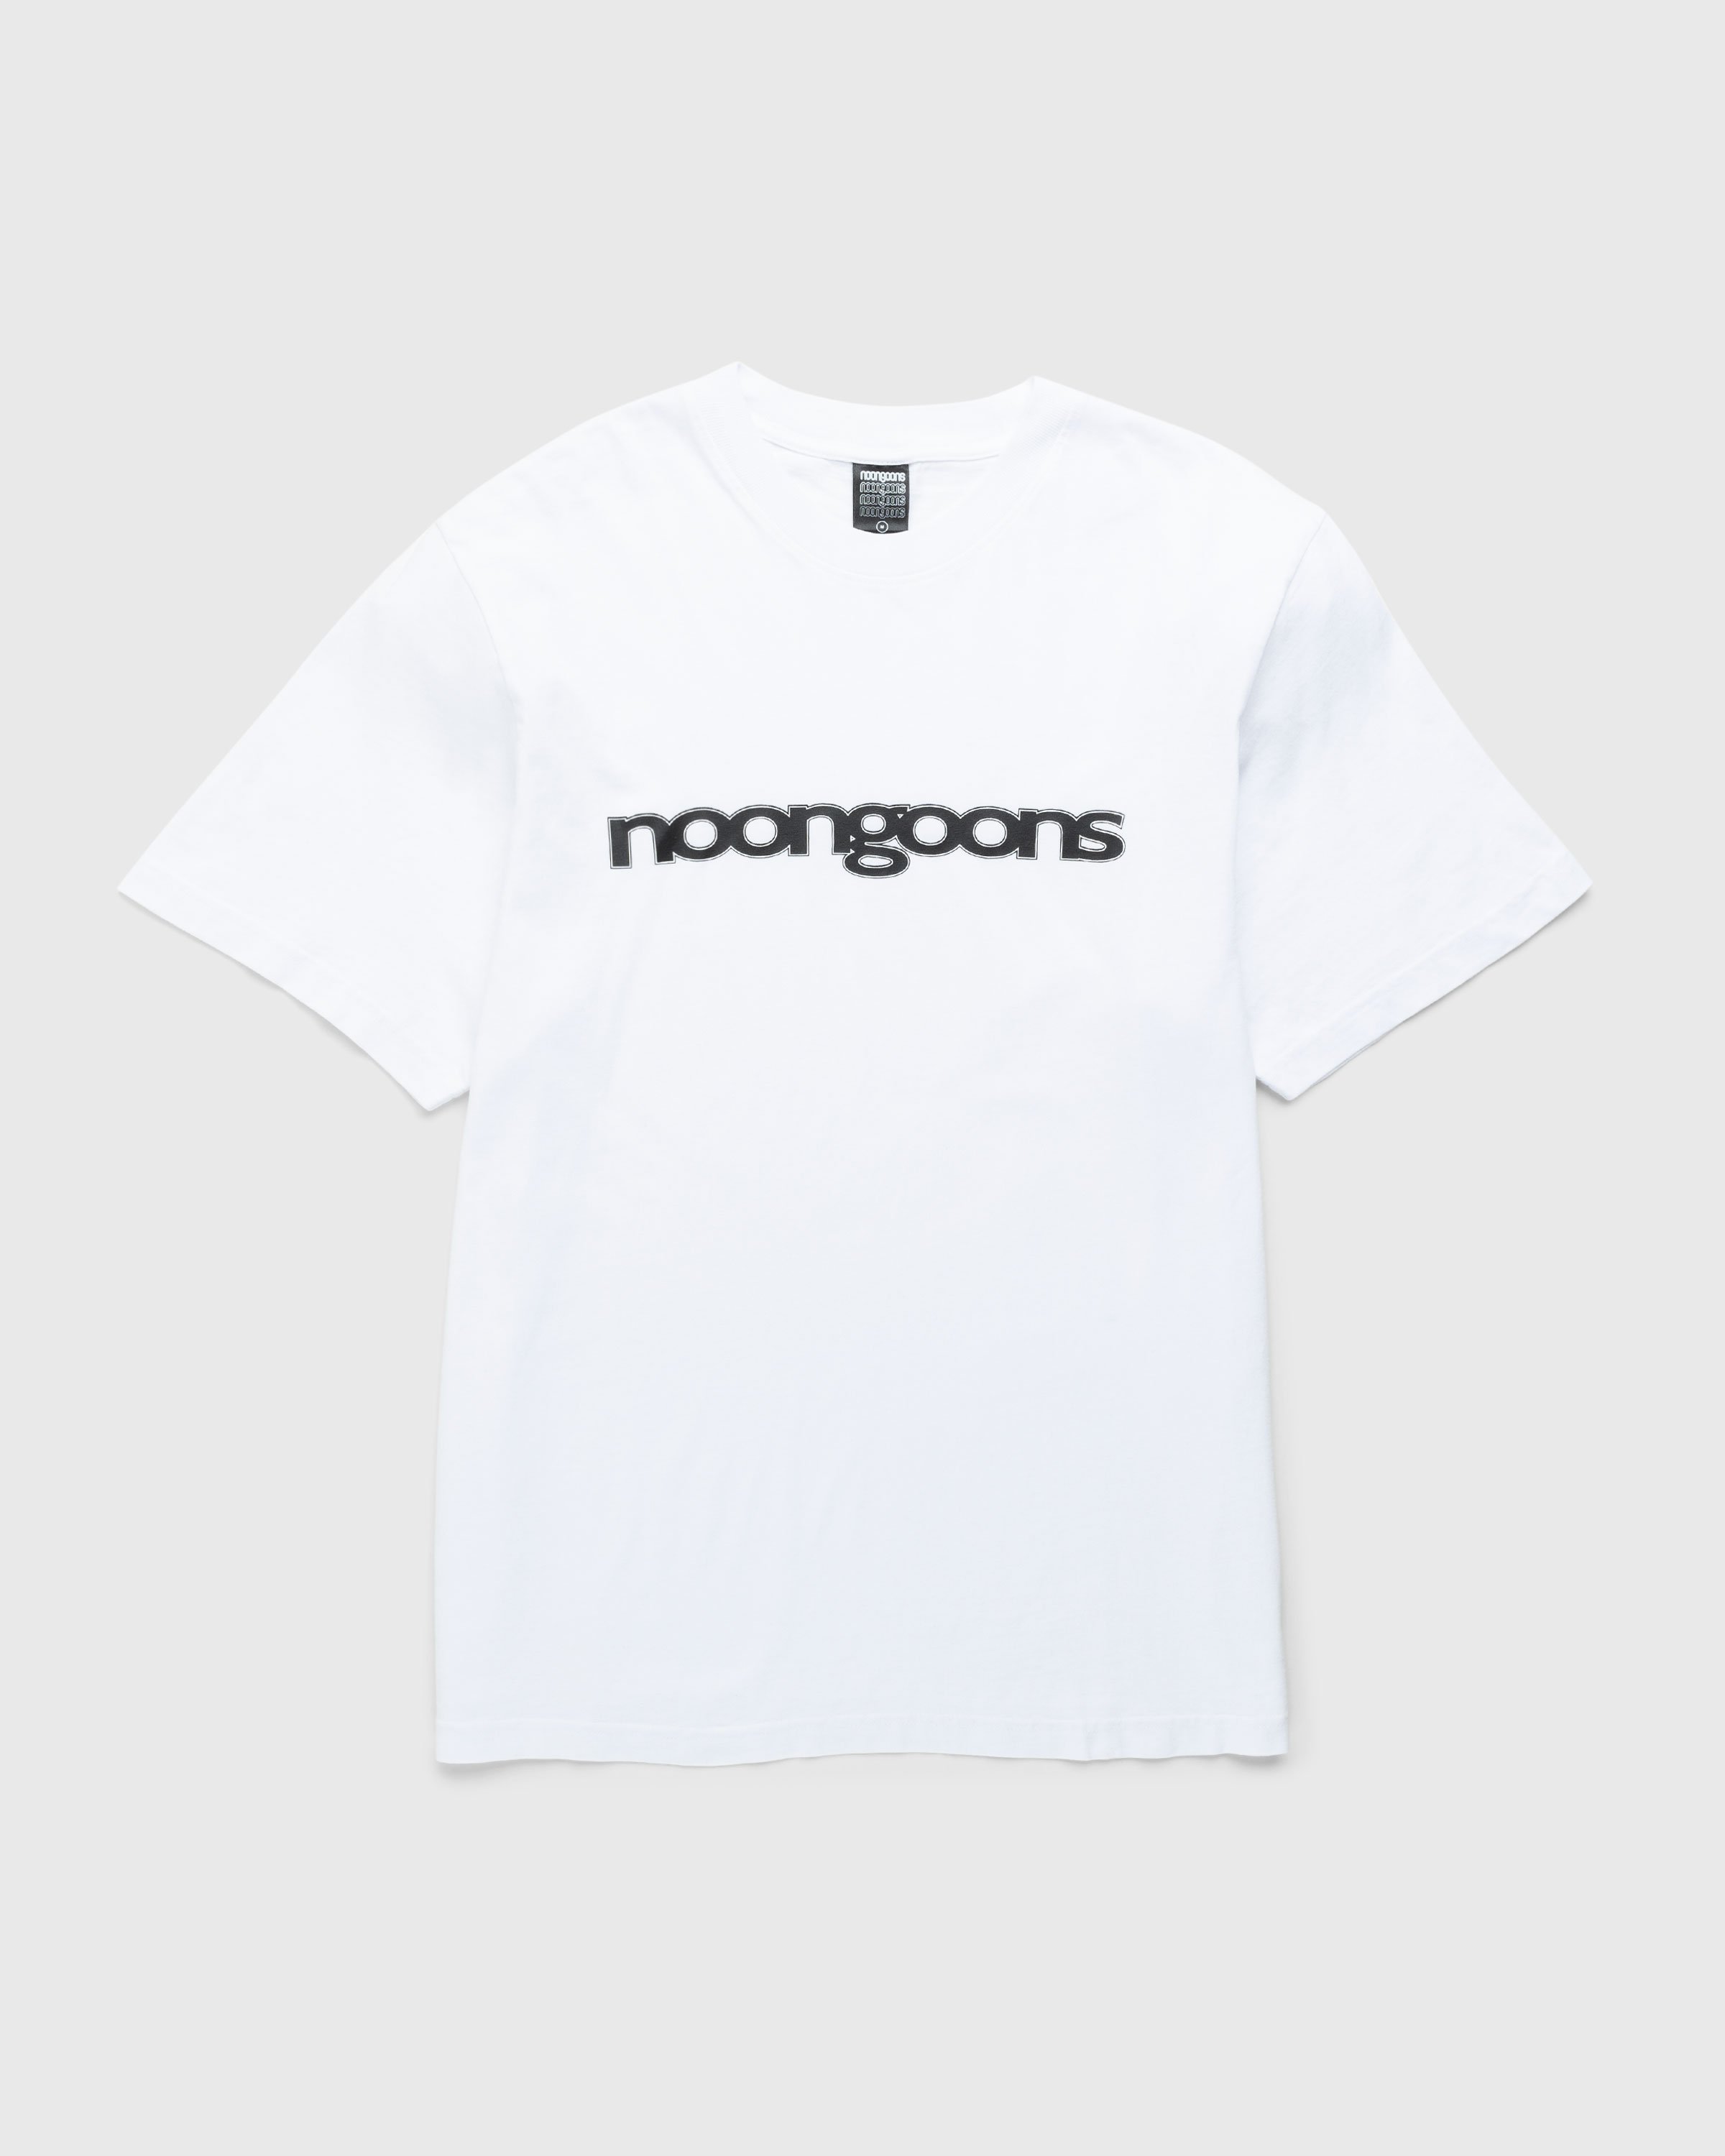 Noon Goons - Very Simple T-Shirt White - Clothing - White - Image 1